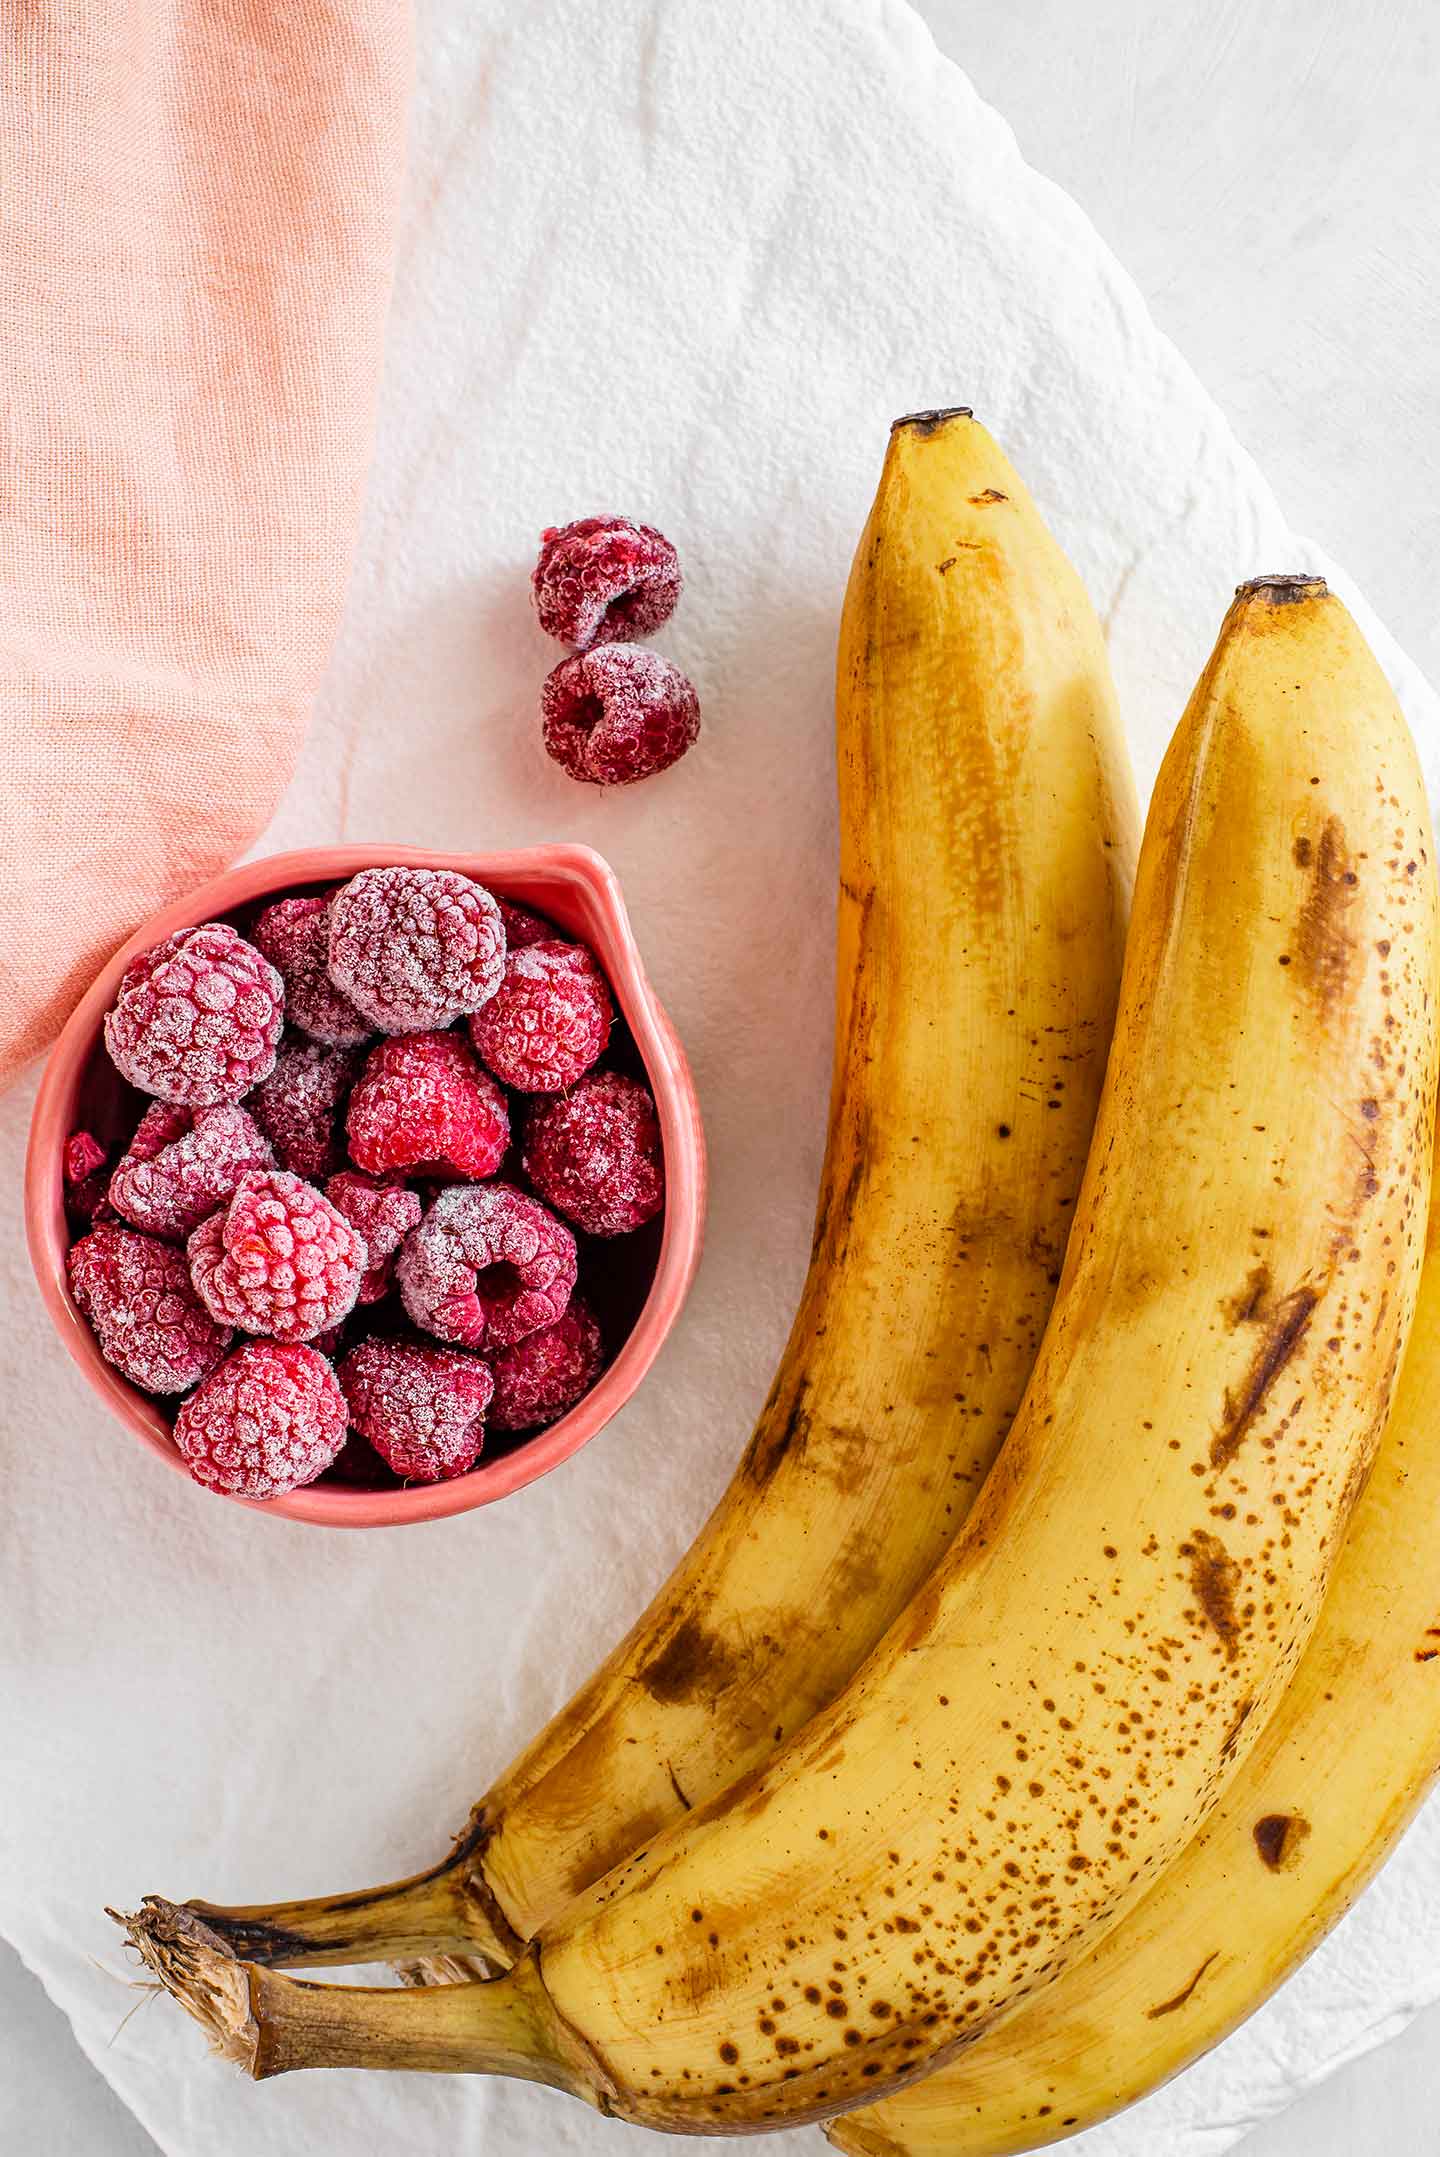 Top down view of three yellow, spotted bananas and frozen raspberries on a white tray.